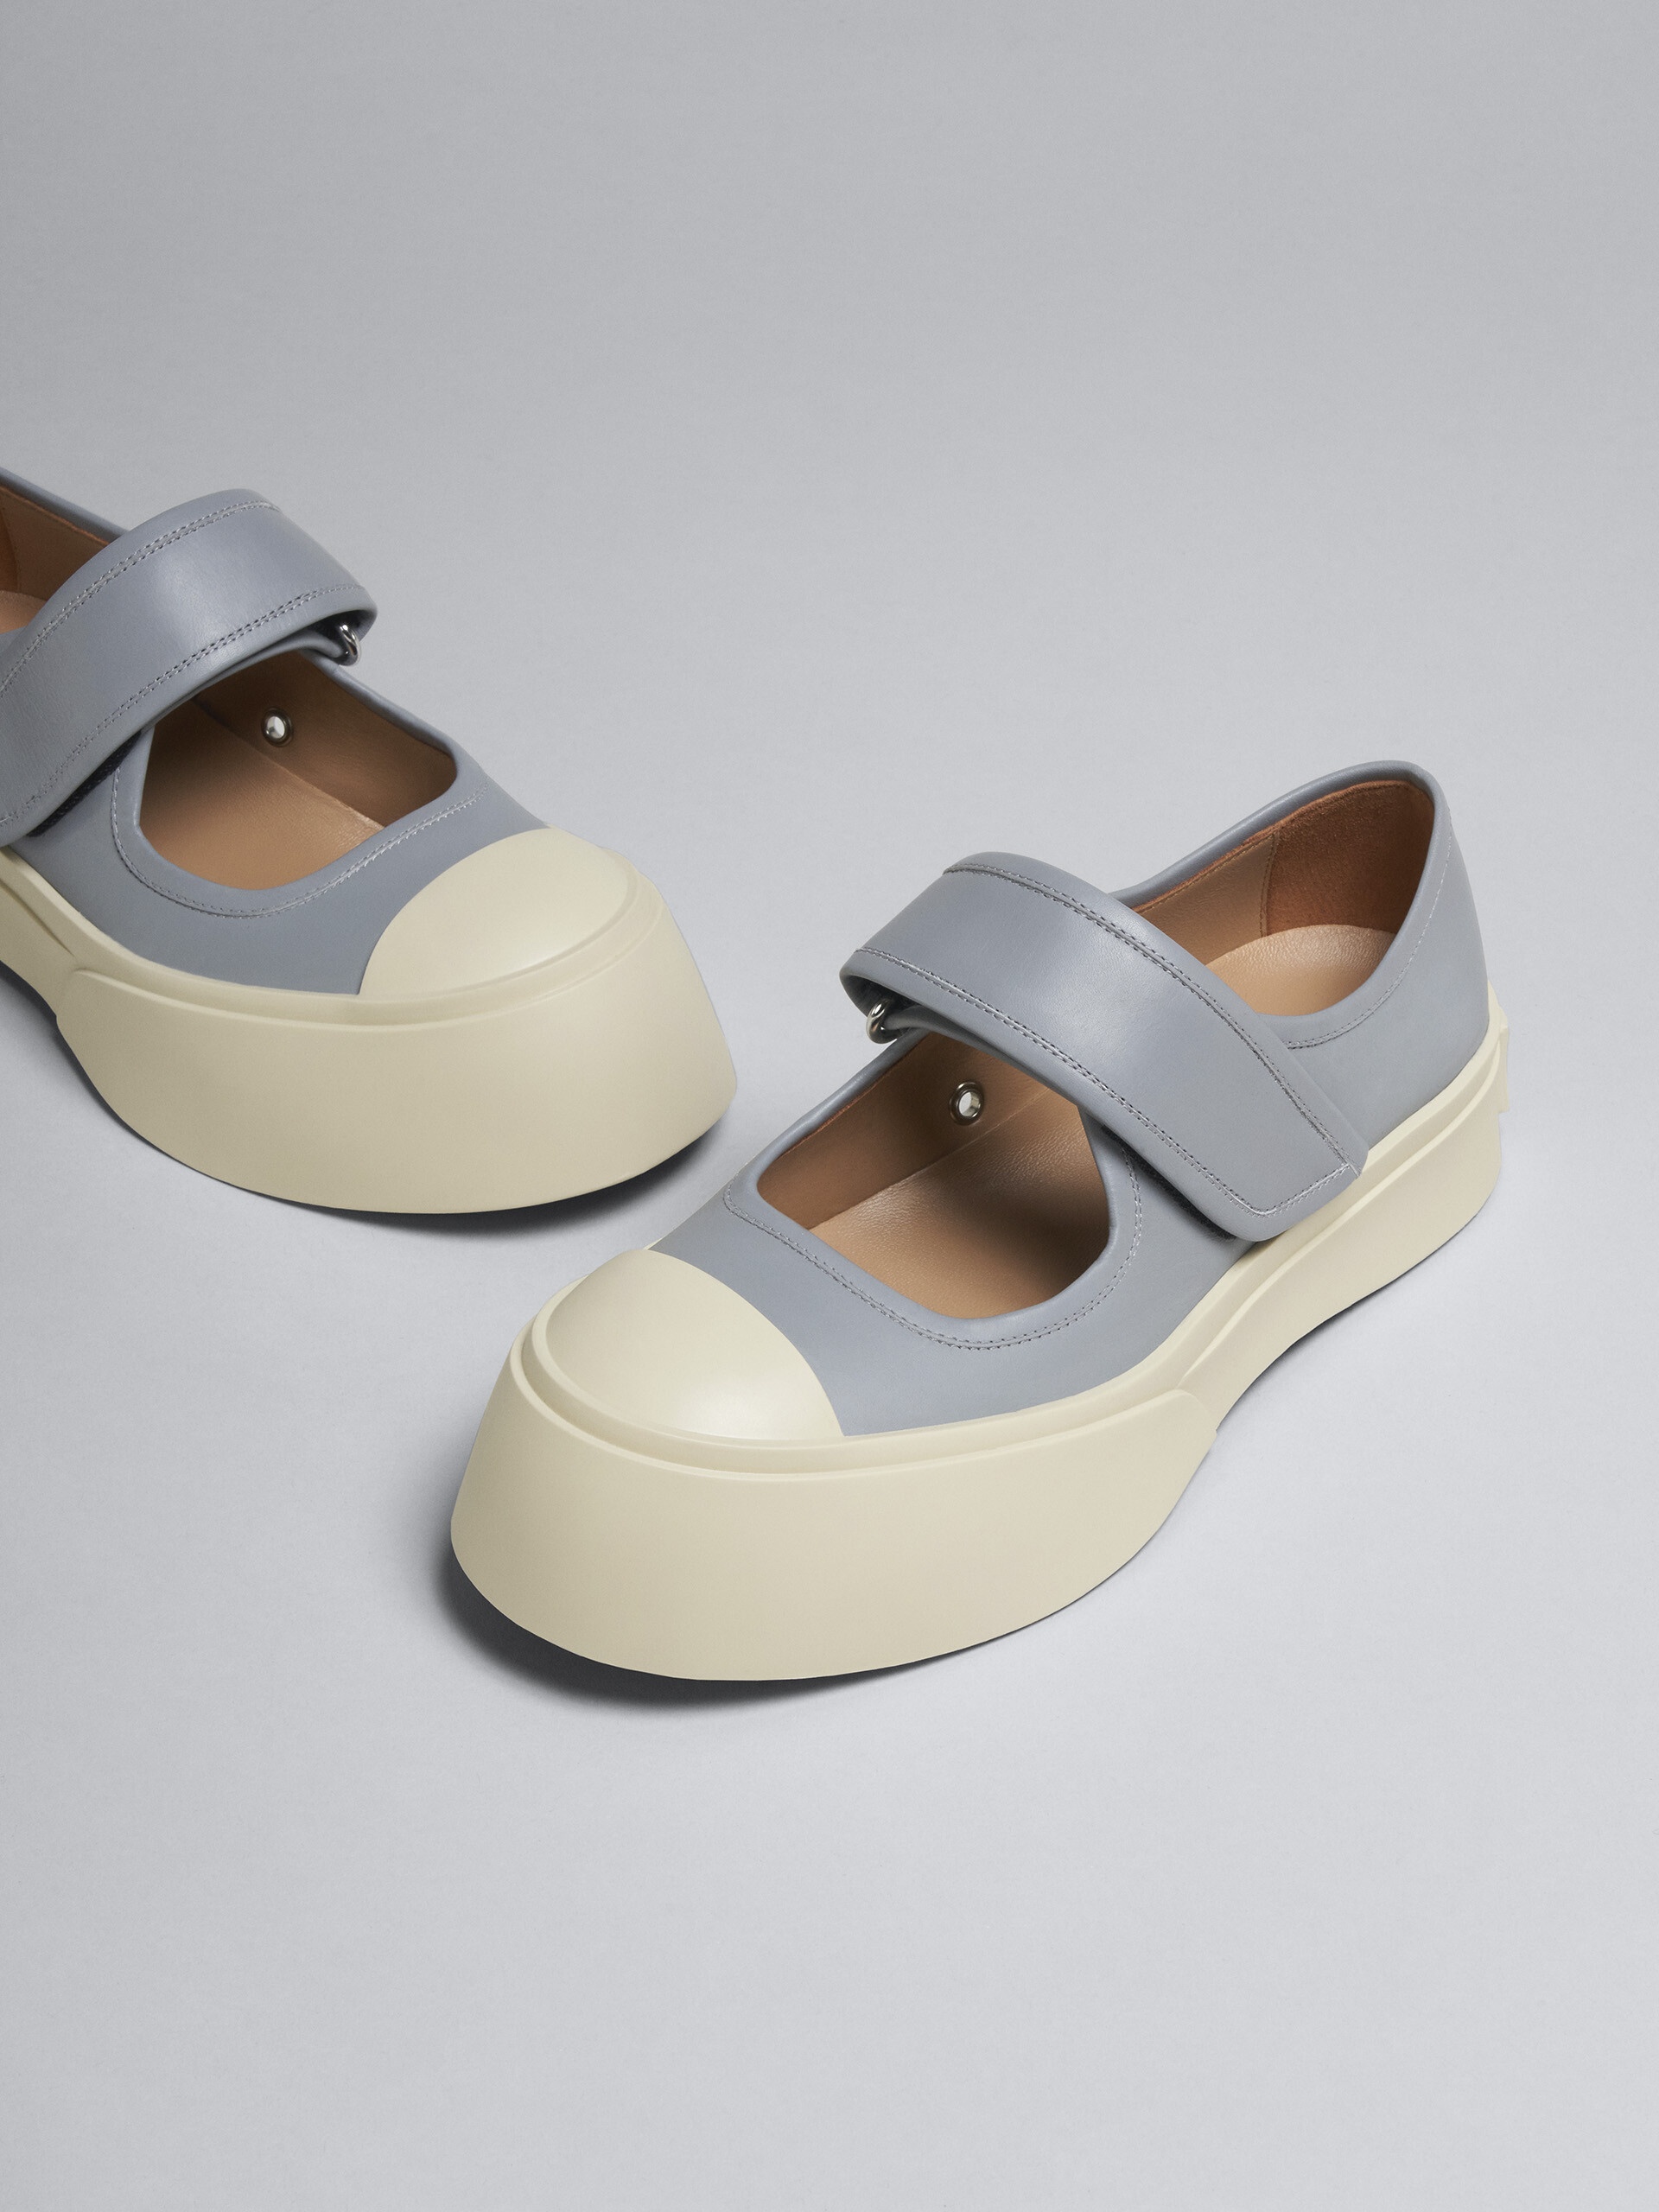 GREY LEATHER MARY JANE SNEAKER - 5